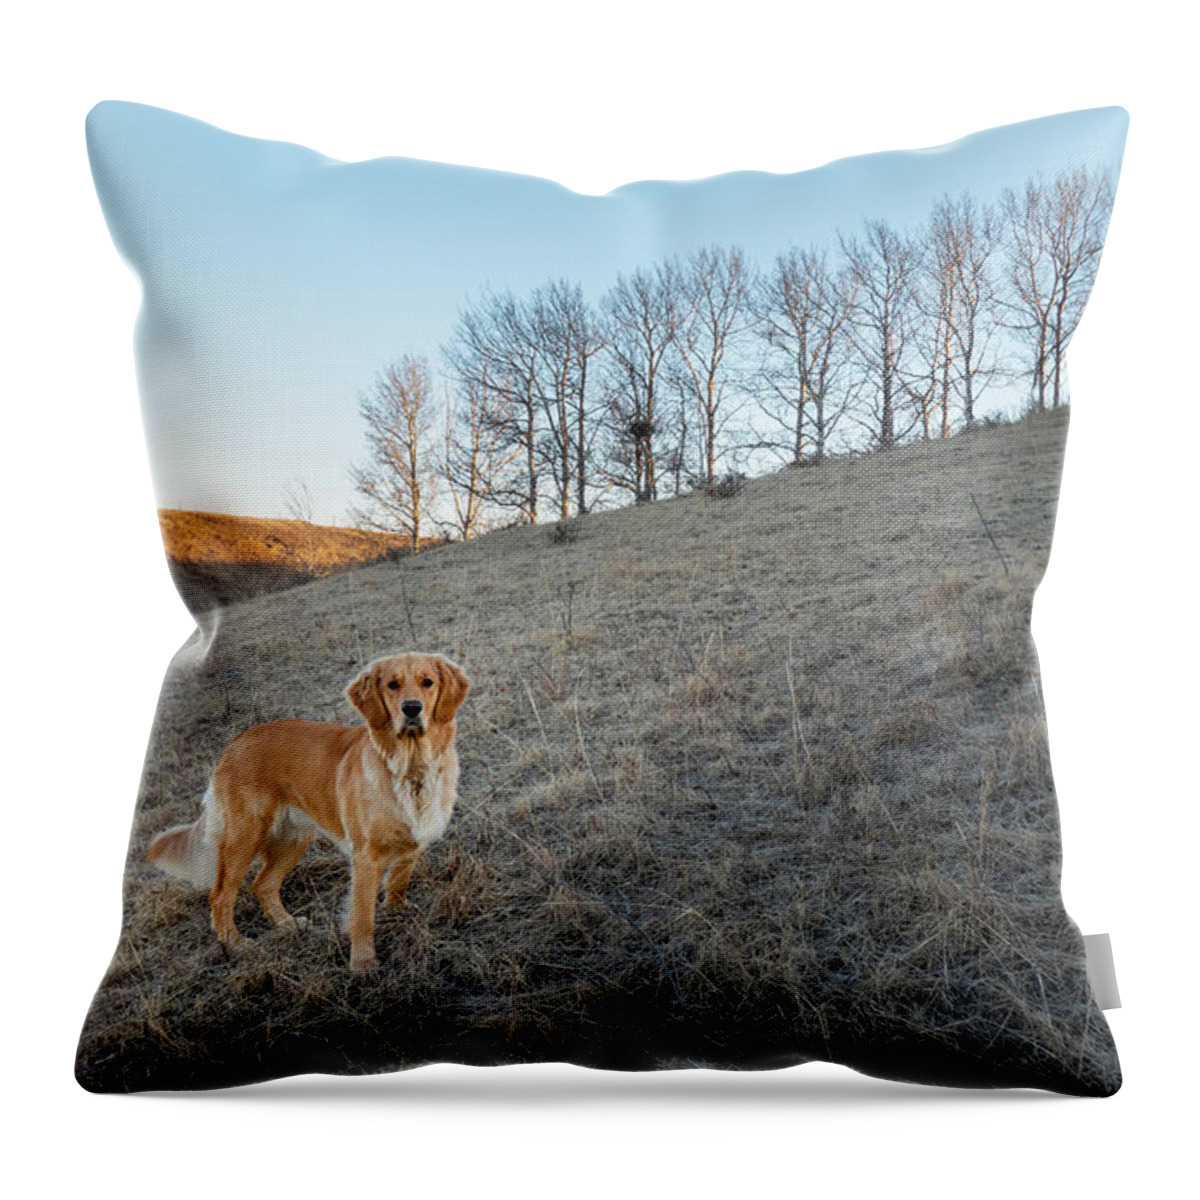 Dog Throw Pillow featuring the photograph Golden Retriever On A Hill by Phil And Karen Rispin